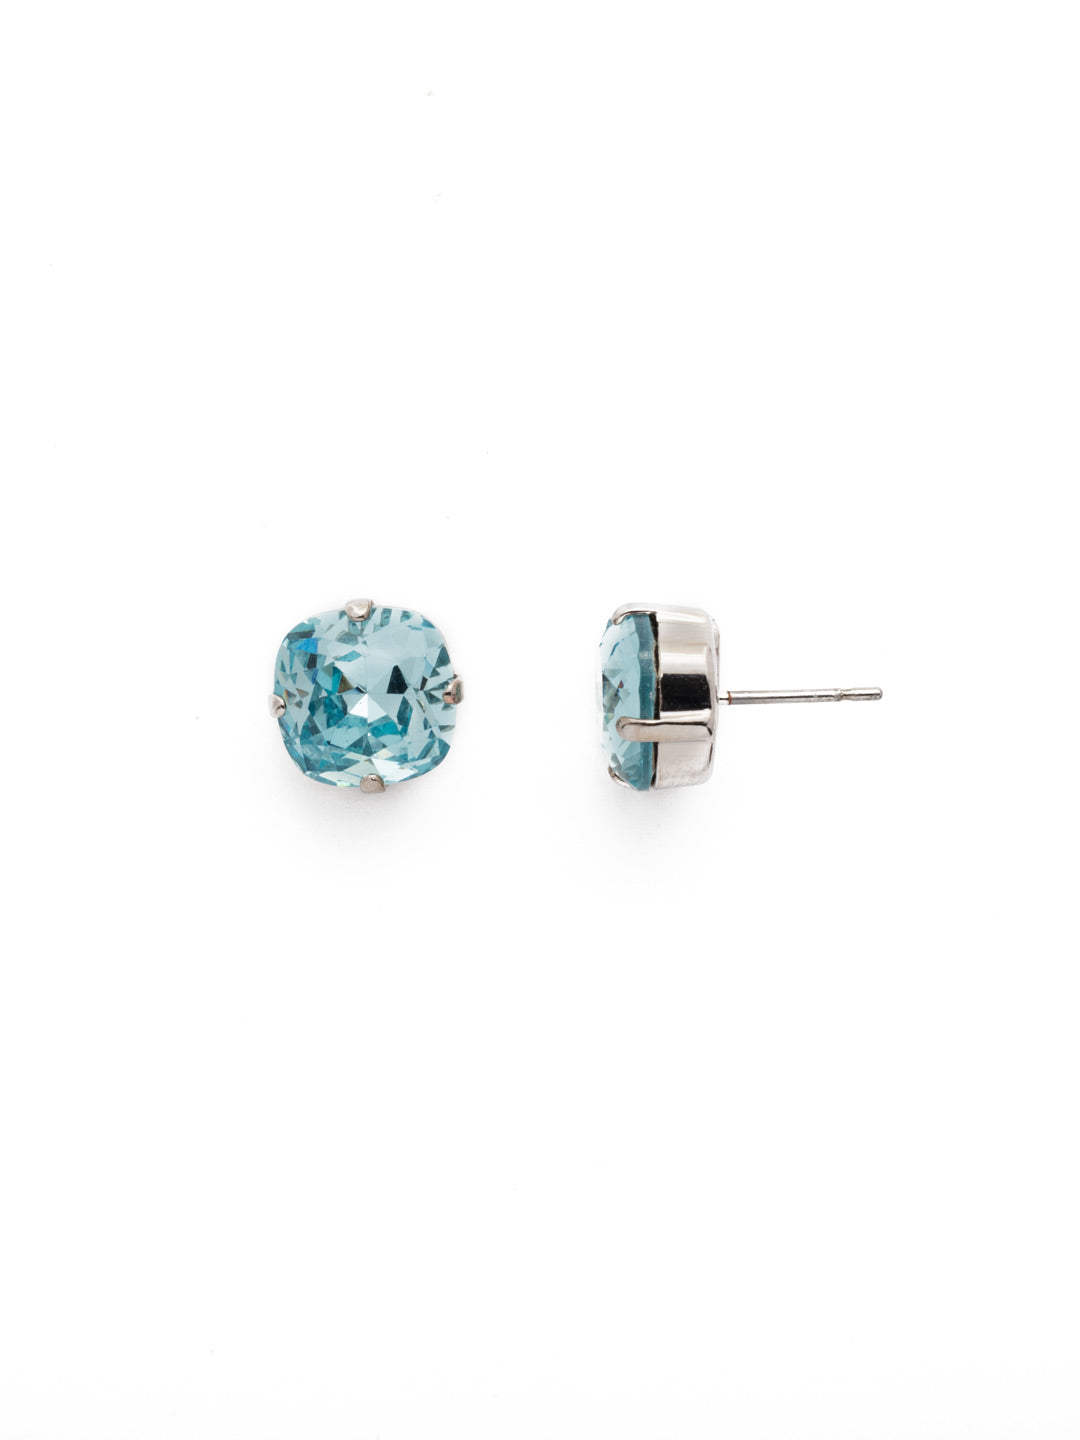 Halcyon Stud Earrings - EDH25RHAQU - A beautiful, luminous cushion-cut crystal in a classic four-pronged setting that's ideal for everyday wear. From Sorrelli's Aquamarine collection in our Palladium Silver-tone finish.